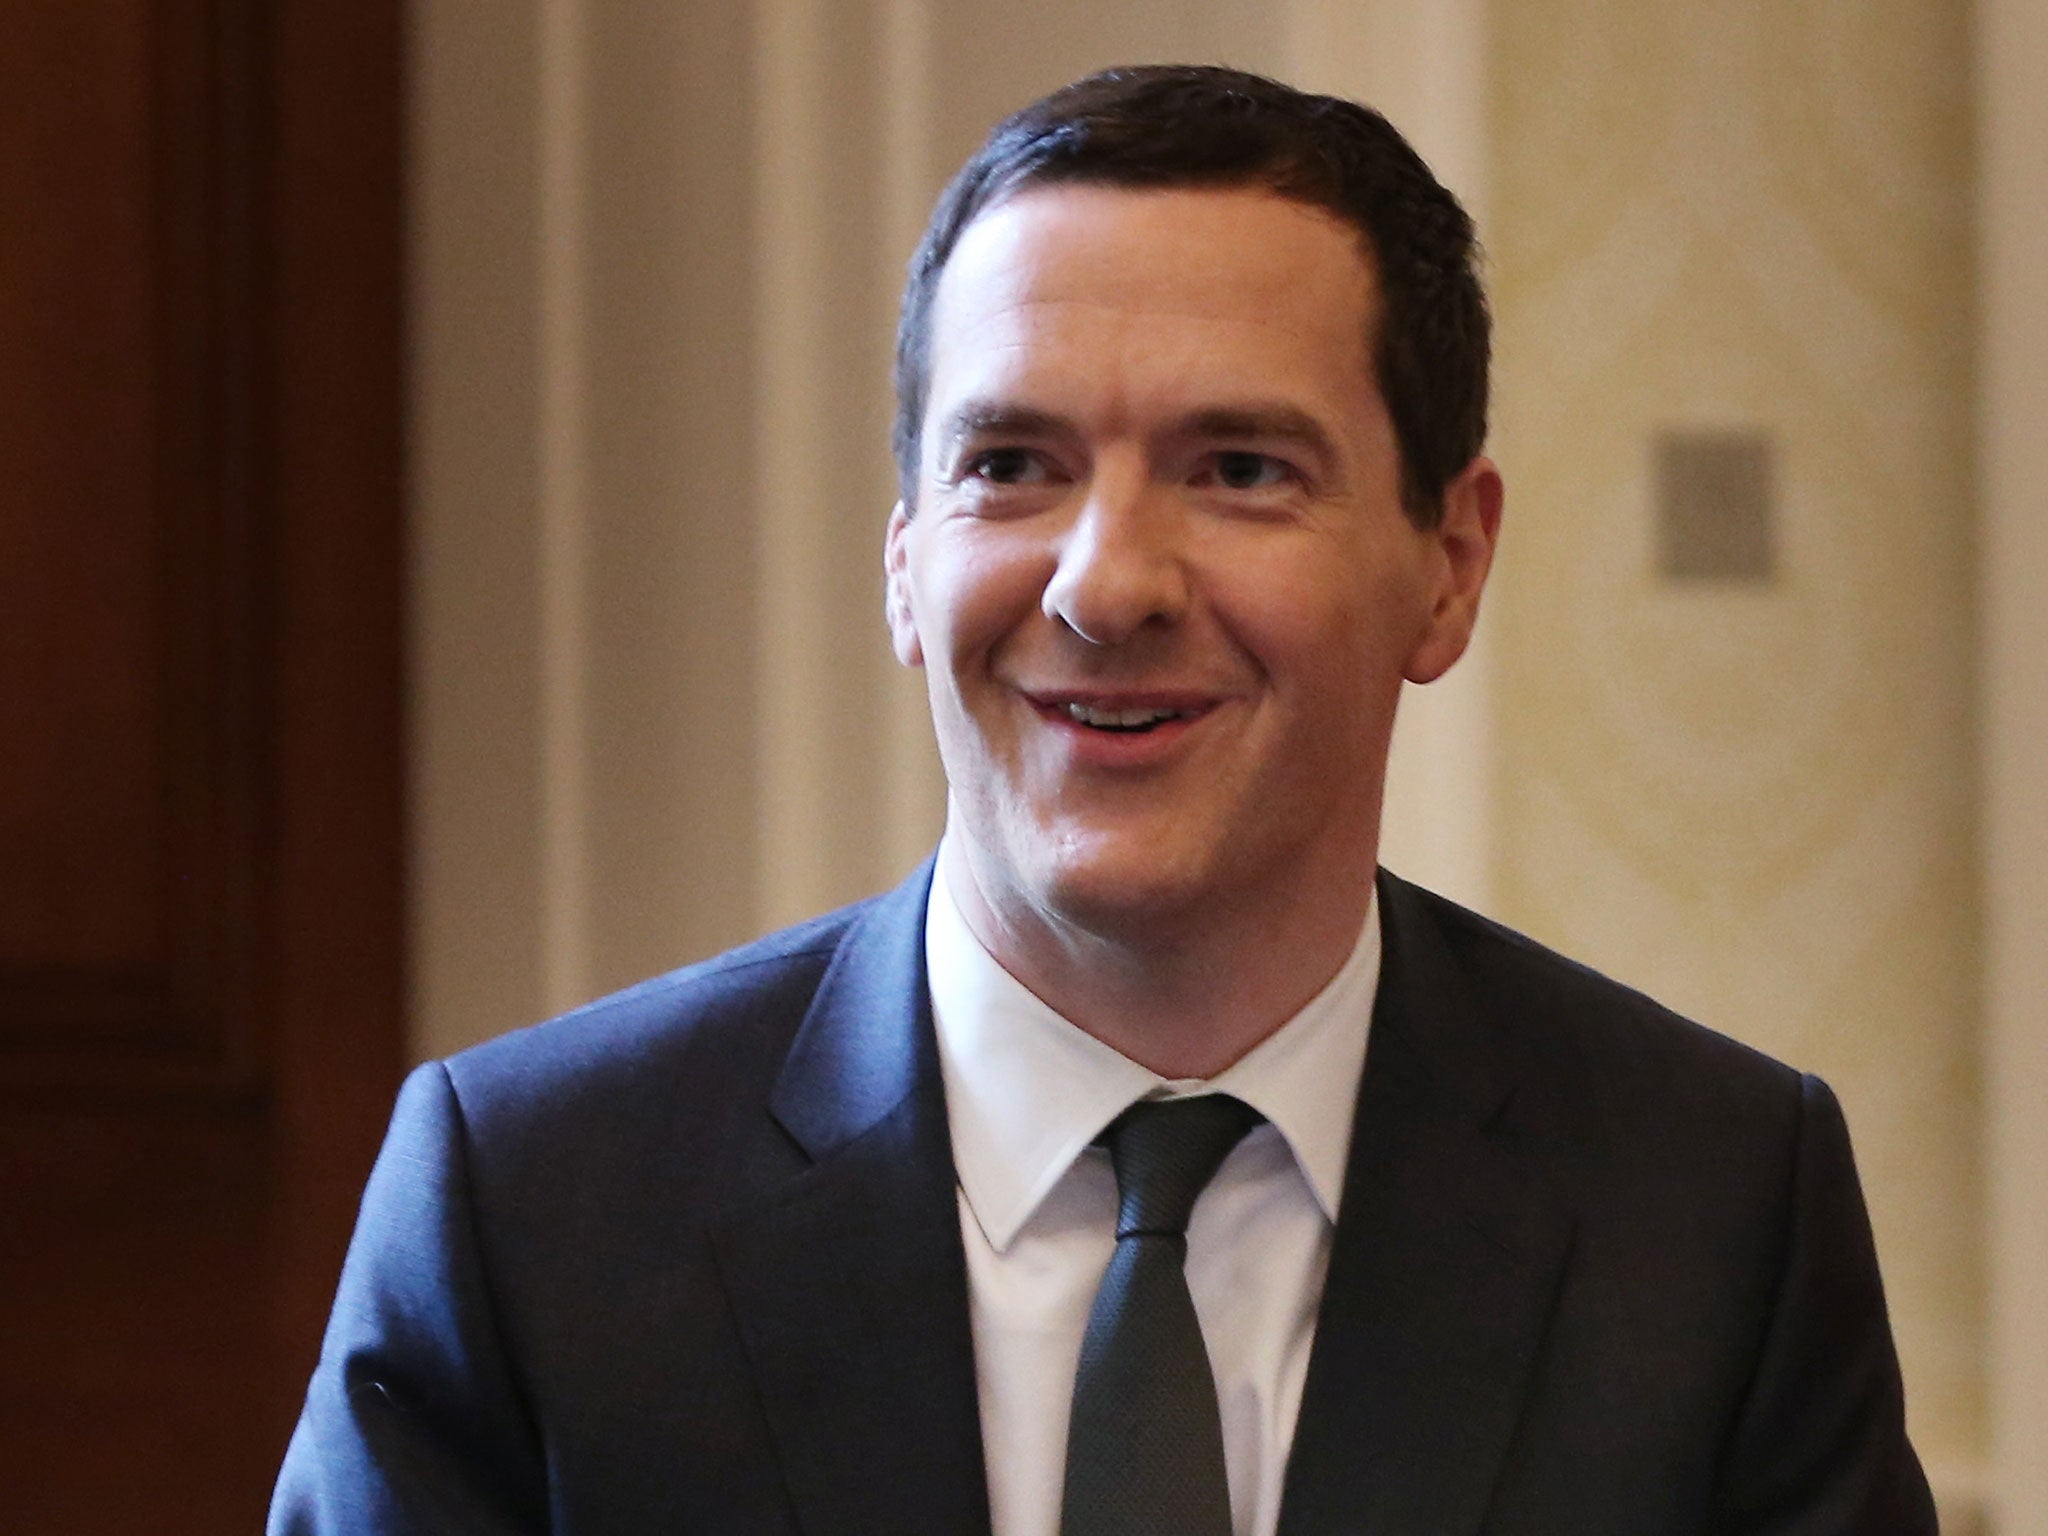 George Osborne has been urged to promote 'secure work'